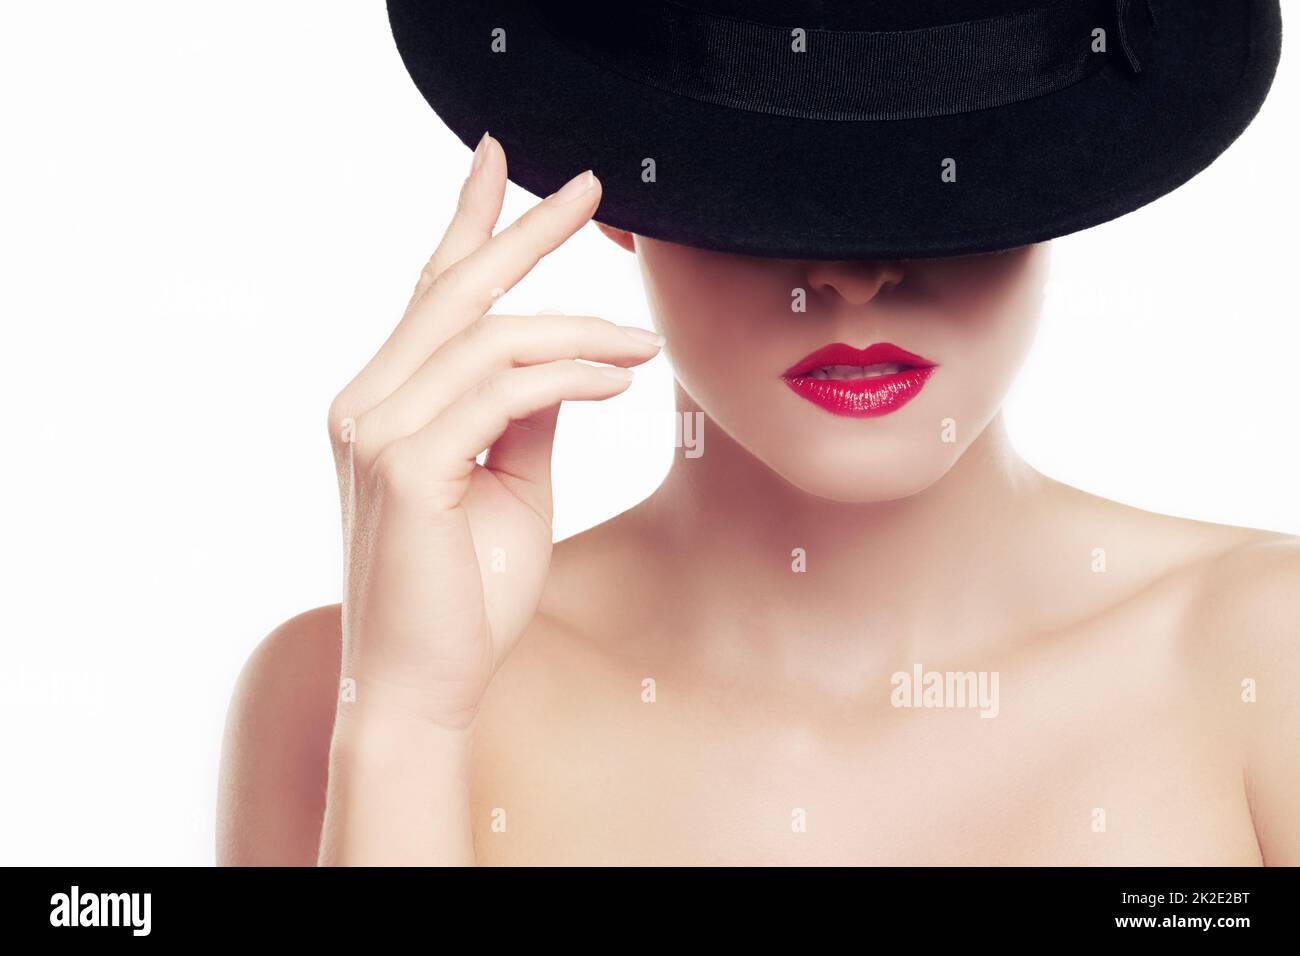 Bold style. Beauty shot of a young woman wearing a hat and red lipstick. Stock Photo